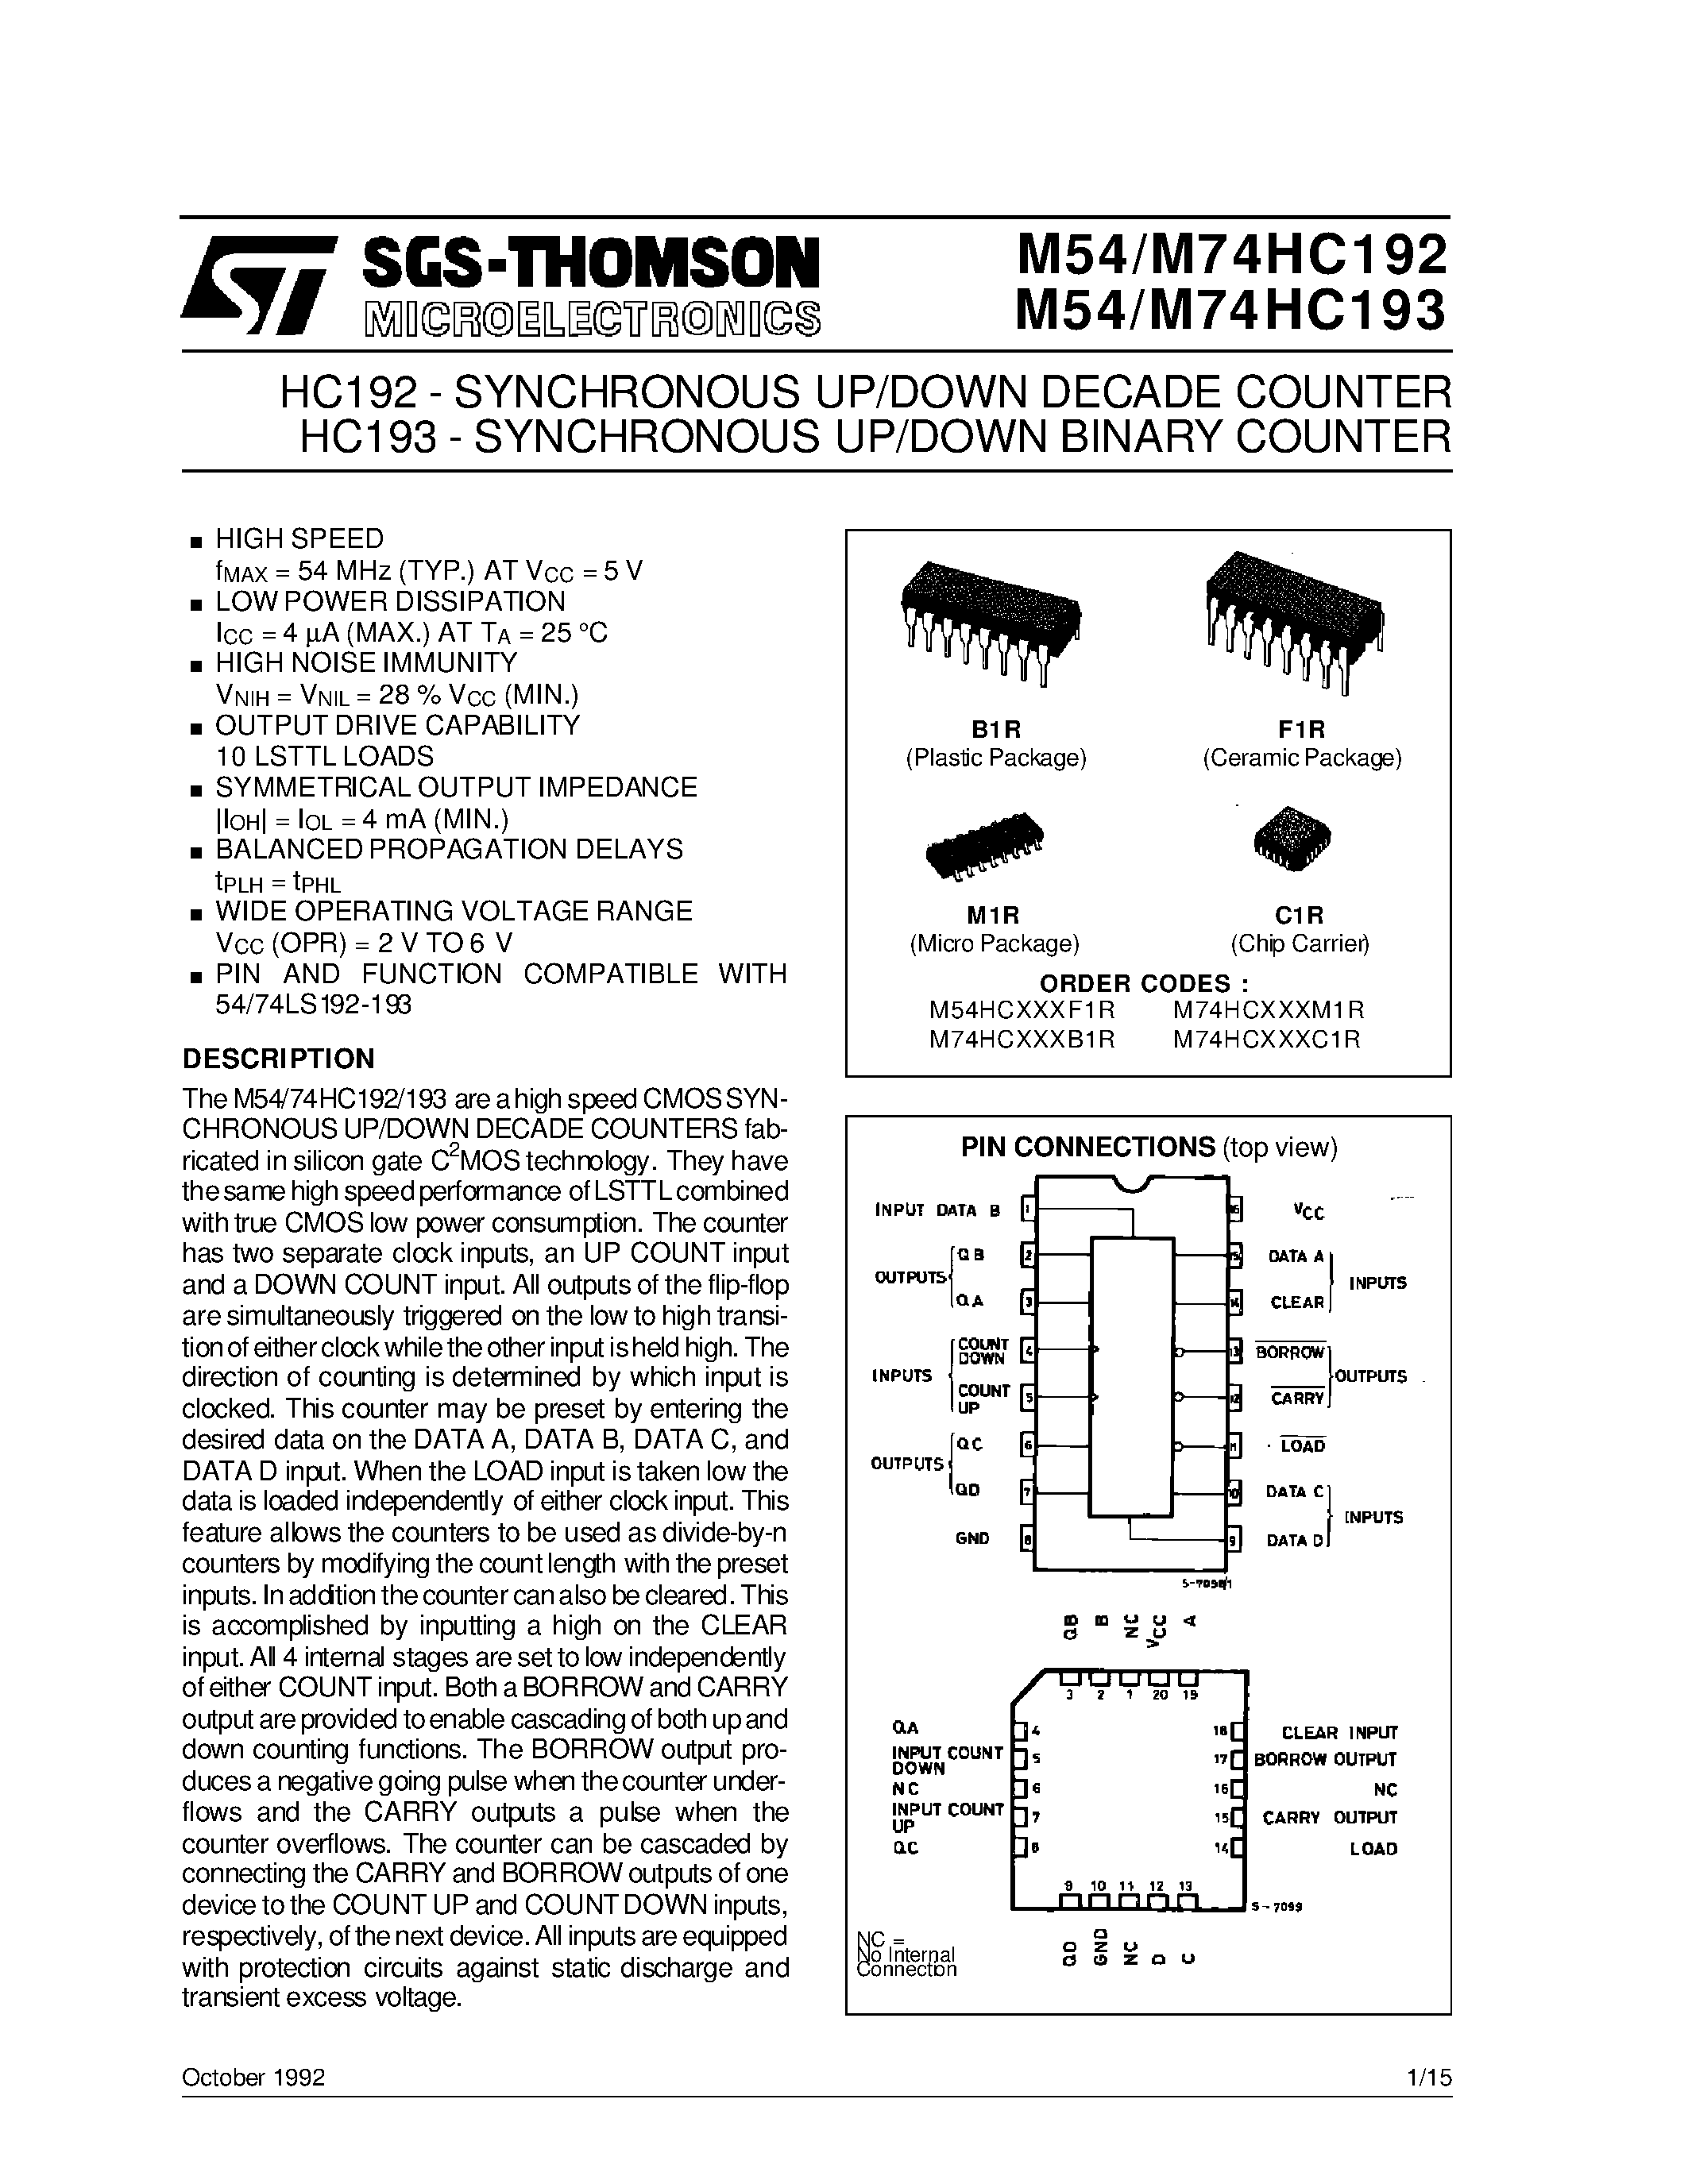 Datasheet 74192 - SYNCHRONOUS UP/DOWN DECADE(/BINARY) COUNTER page 1